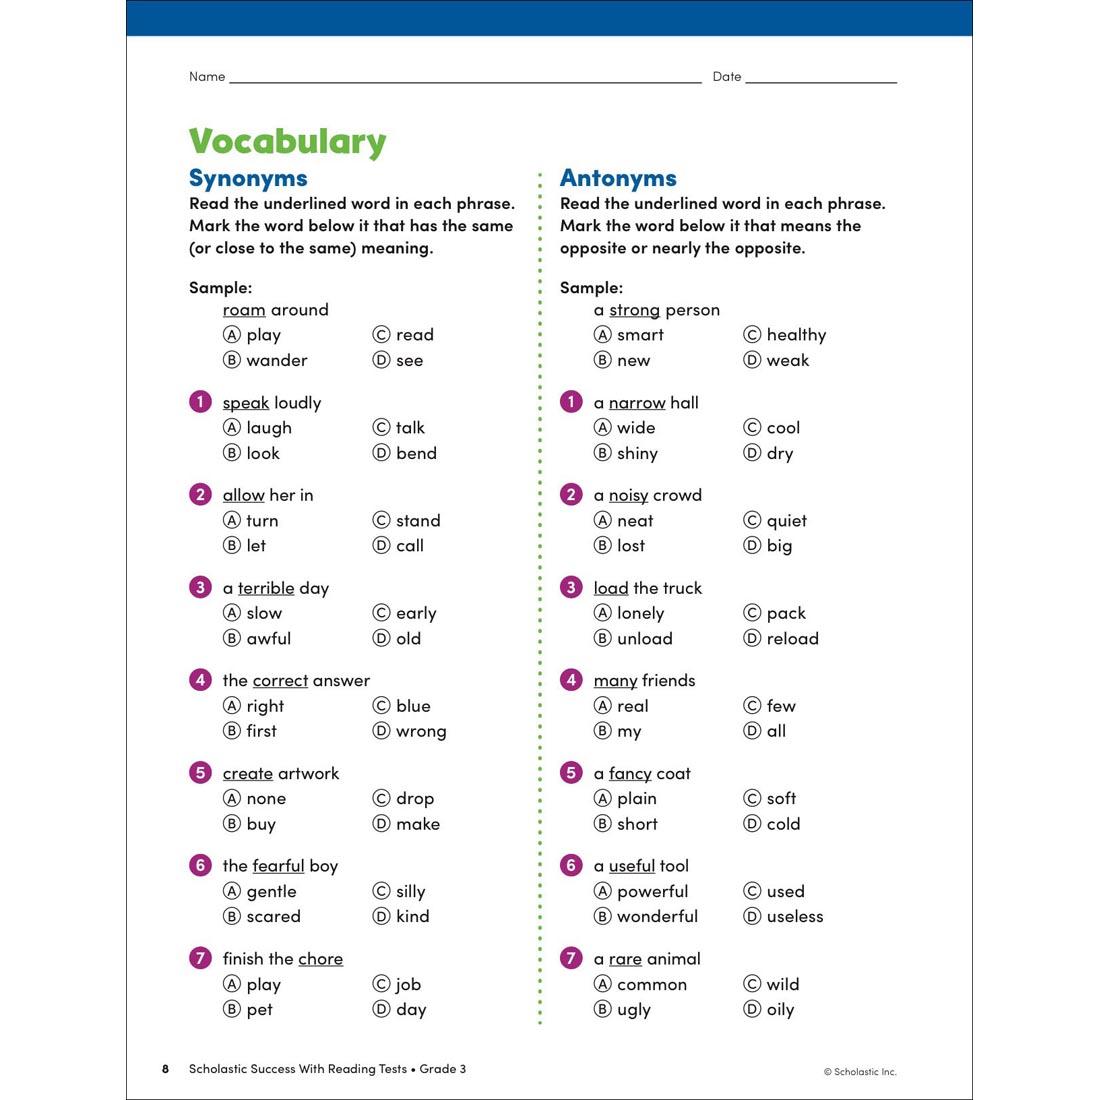 page 8 from Scholastic Success With Reading Tests Workbook Grade 3